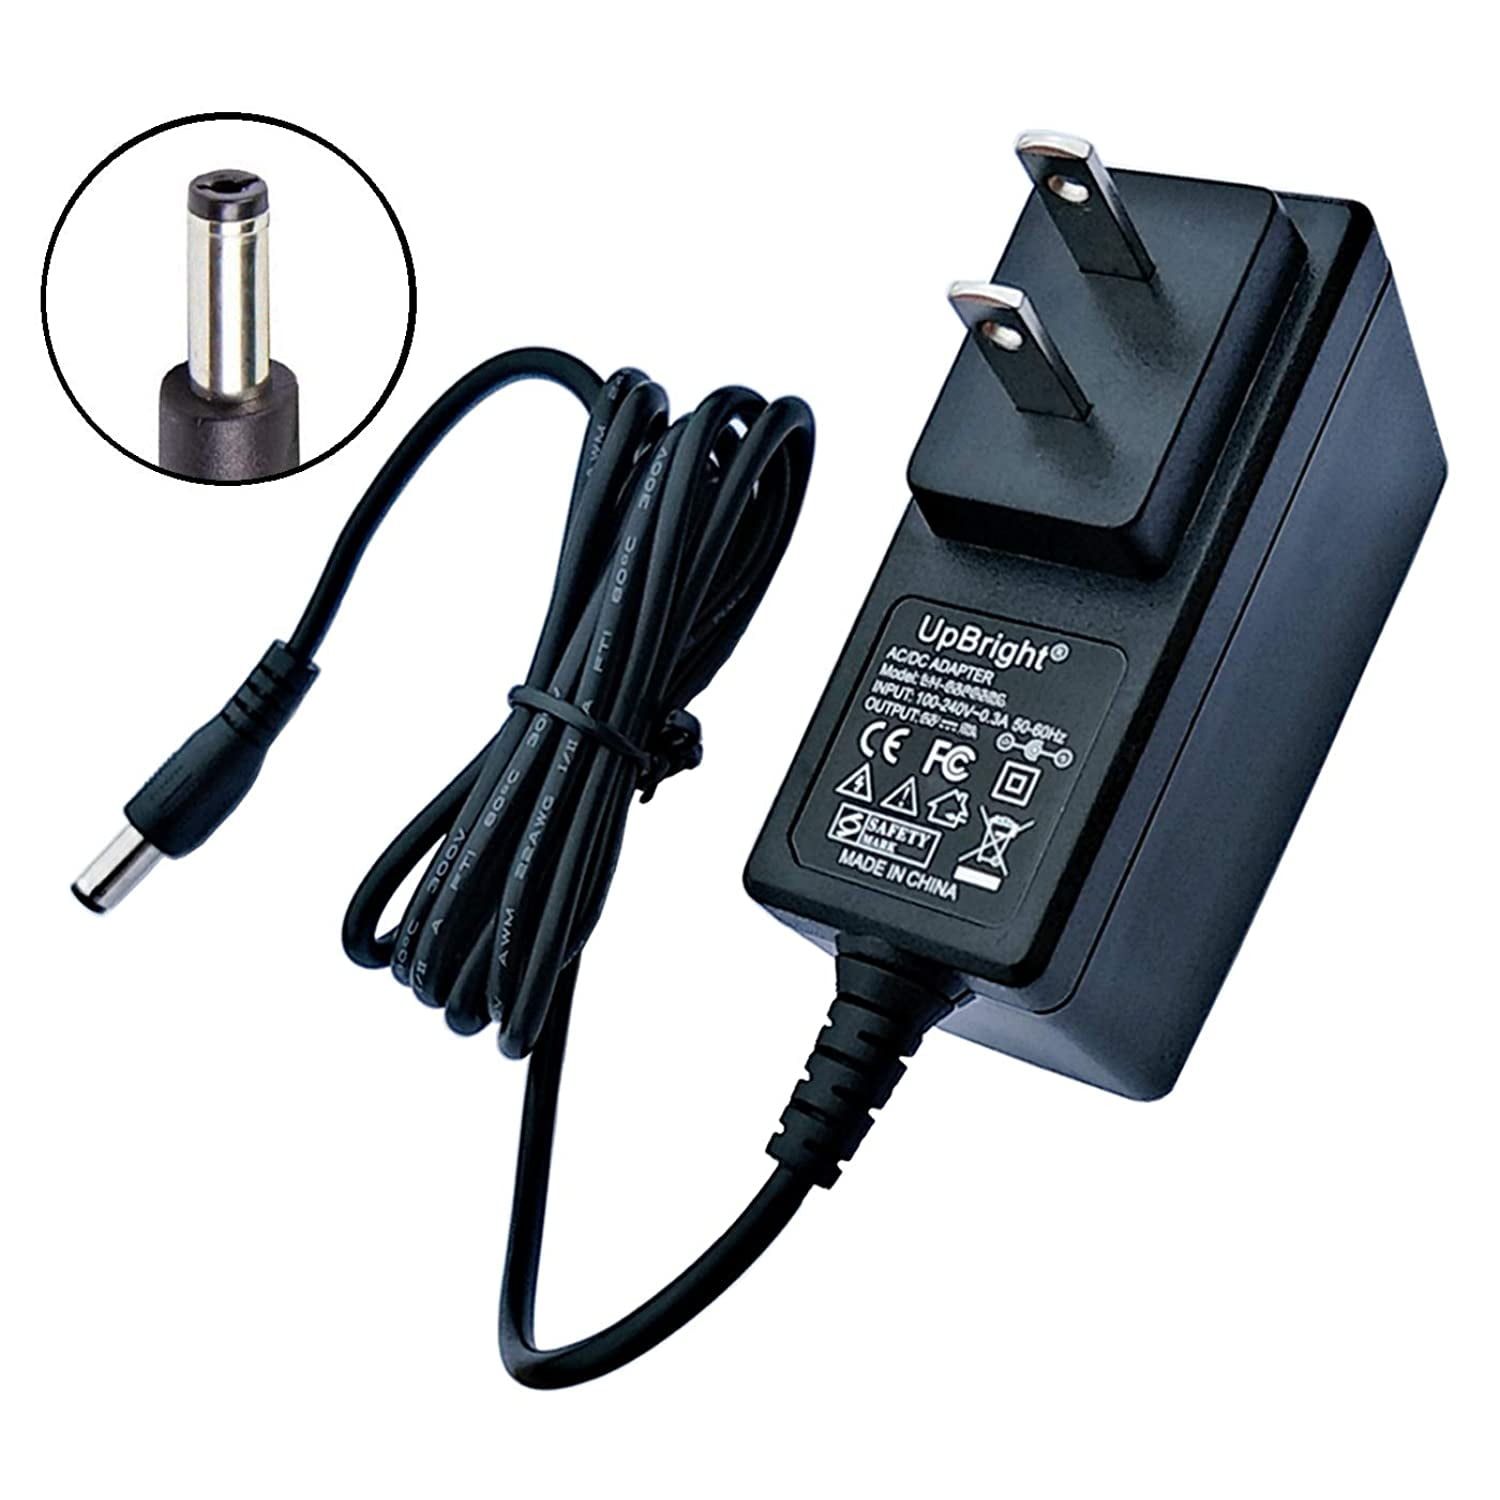 UpBright 7.5V AC/DC Adapter Compatible with Vision Fitness Elliptical Trainer X6200 0812EPC100100914 X6200HRC 48-075-1000 R2100 RB18 RB42 RB58 R2200HRT MRB43 RB105 RB54D Vestax VCI-400 VCI-380 Power